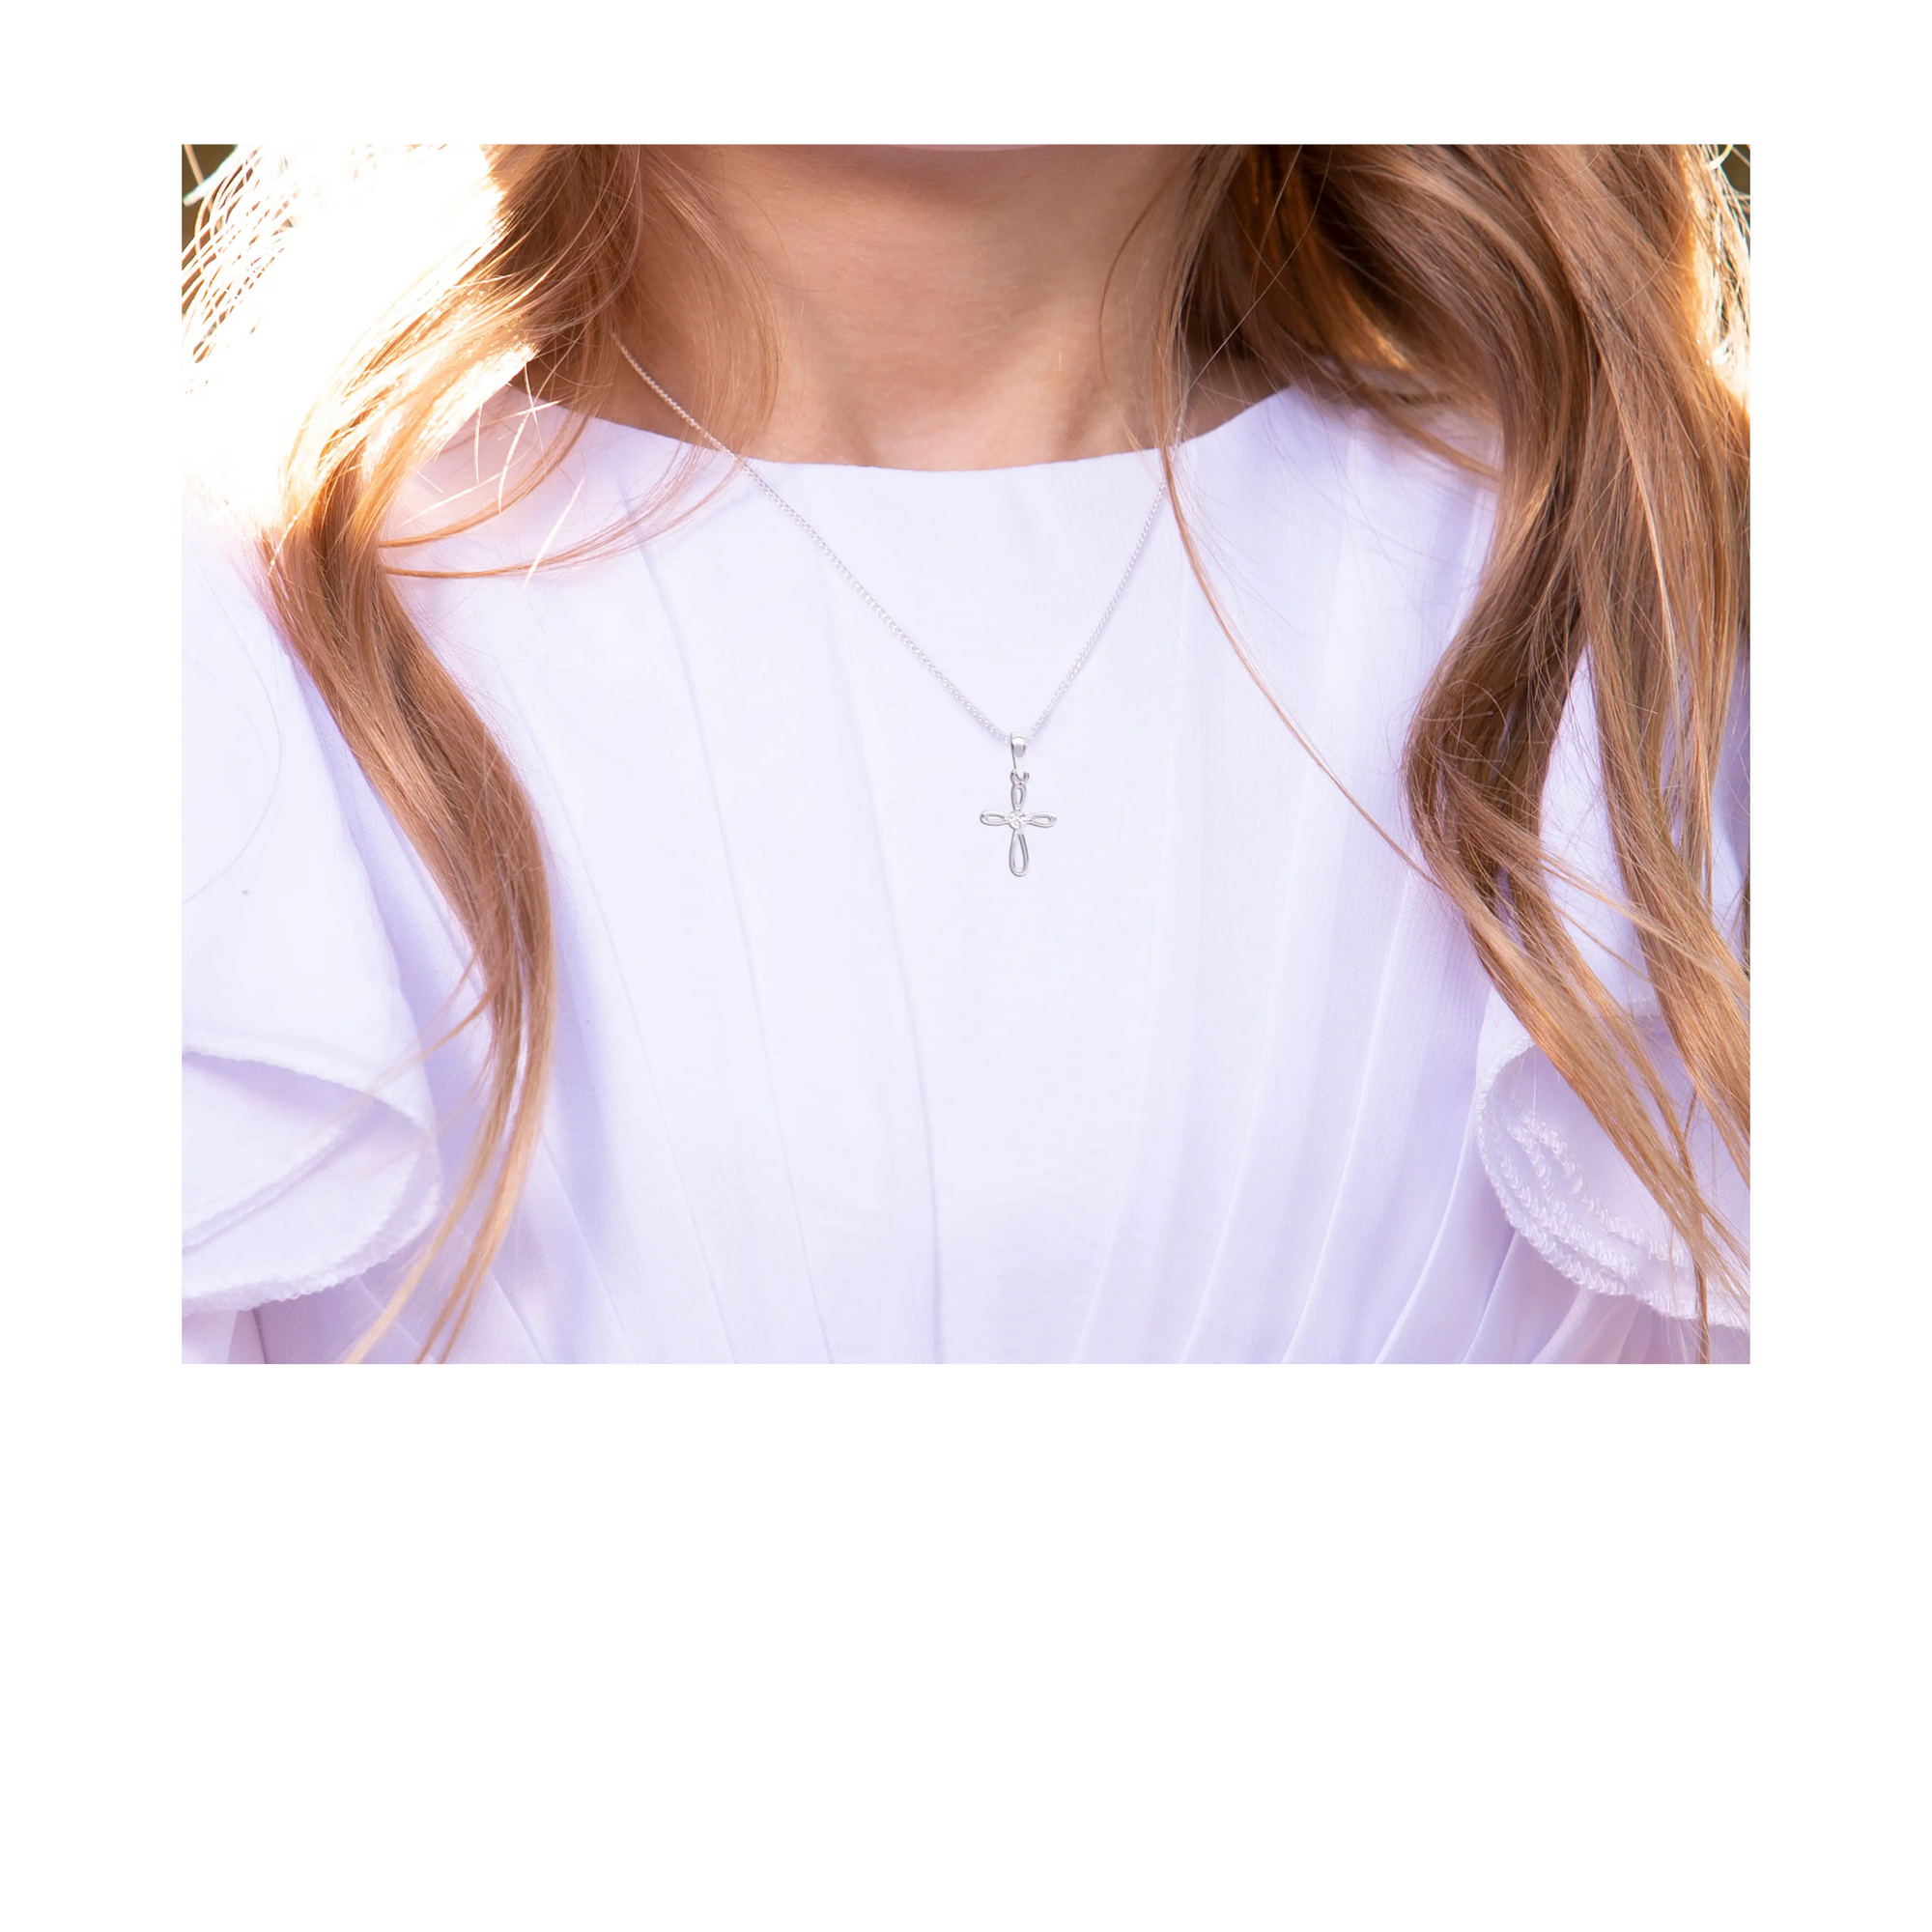 Sterling Silver Cross Infinity Necklace